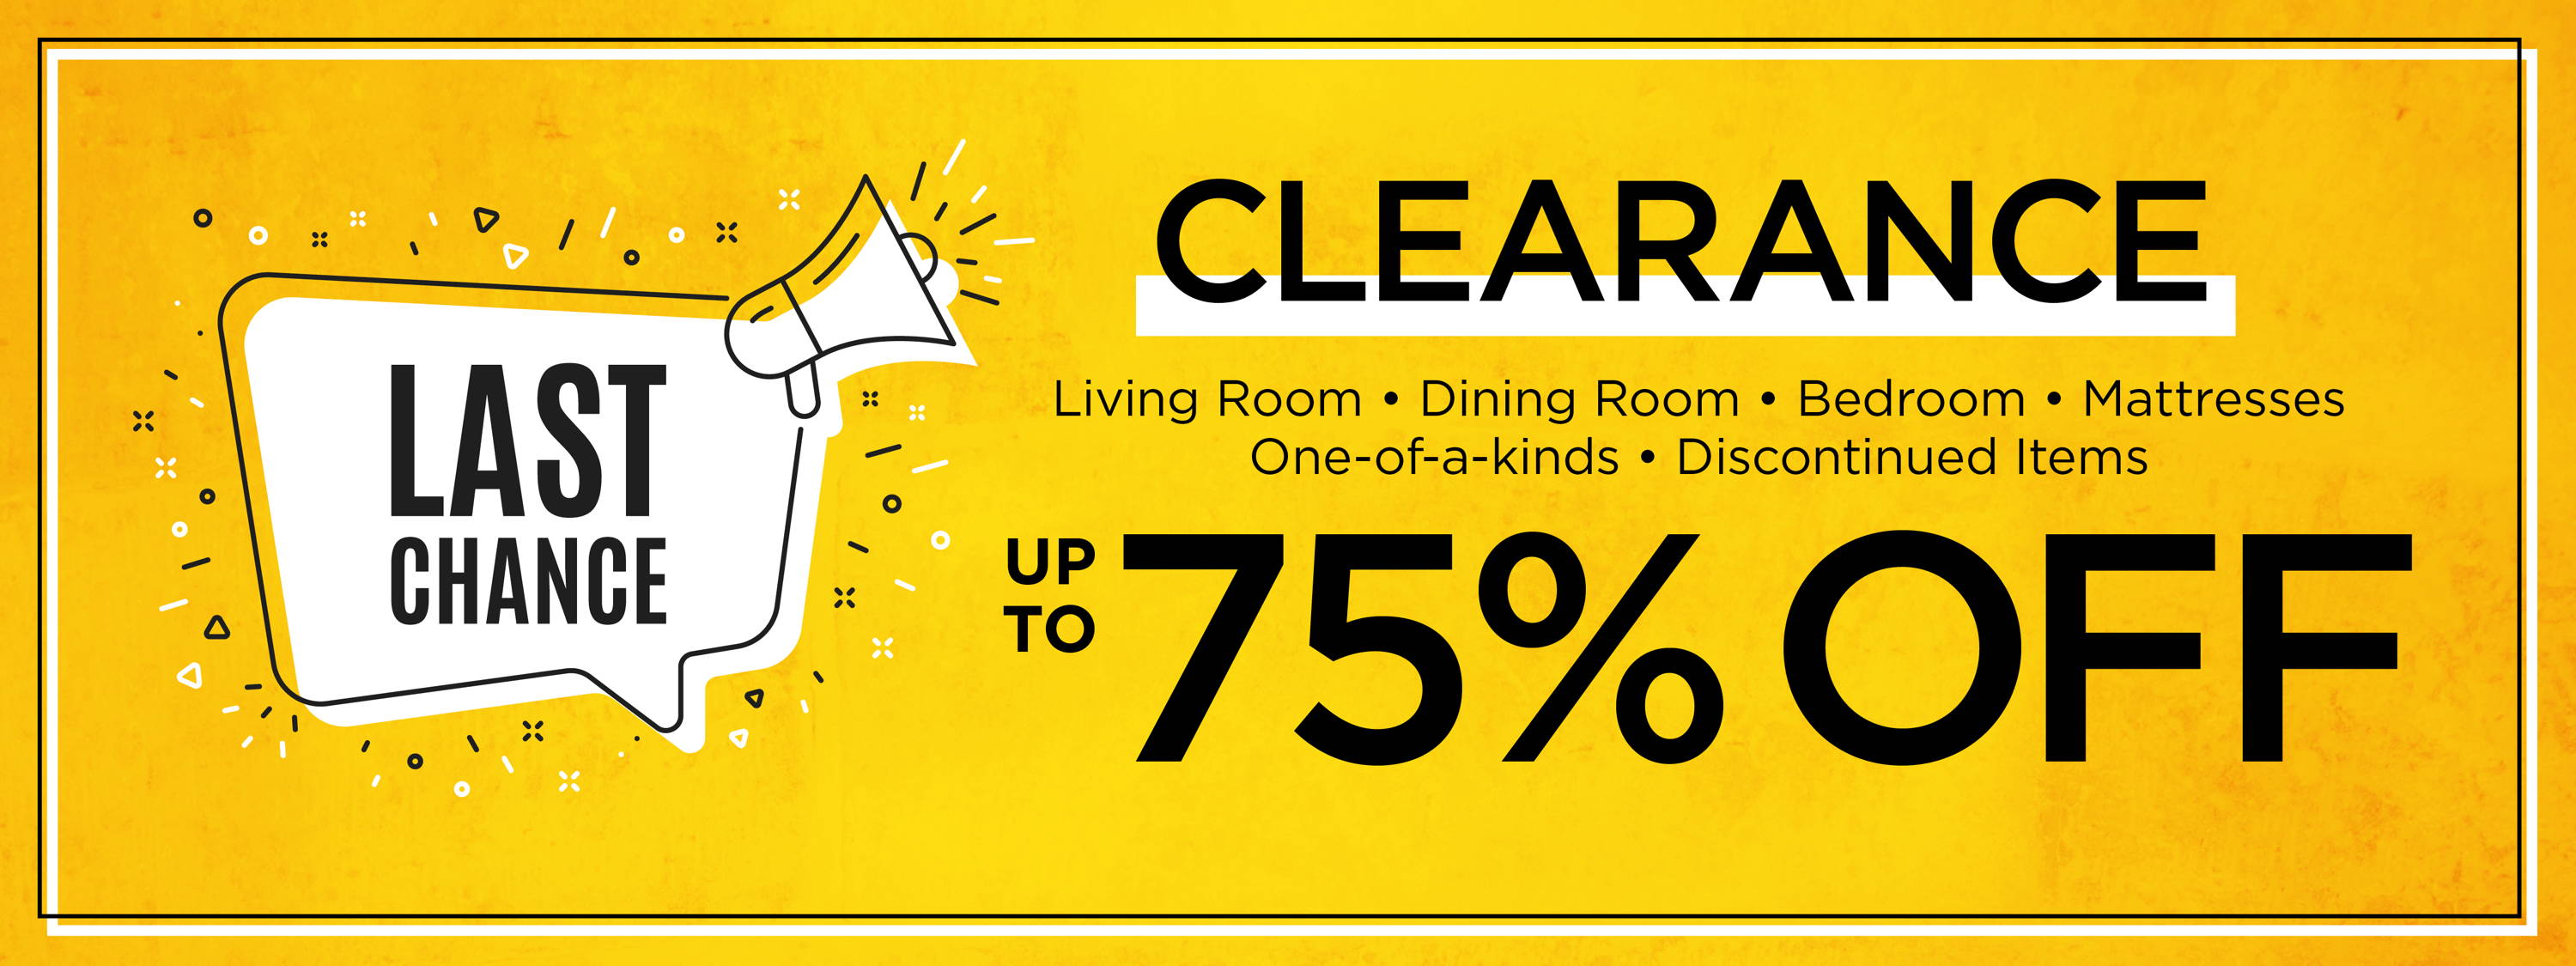 Furniture and mattress clearance up to 75% off